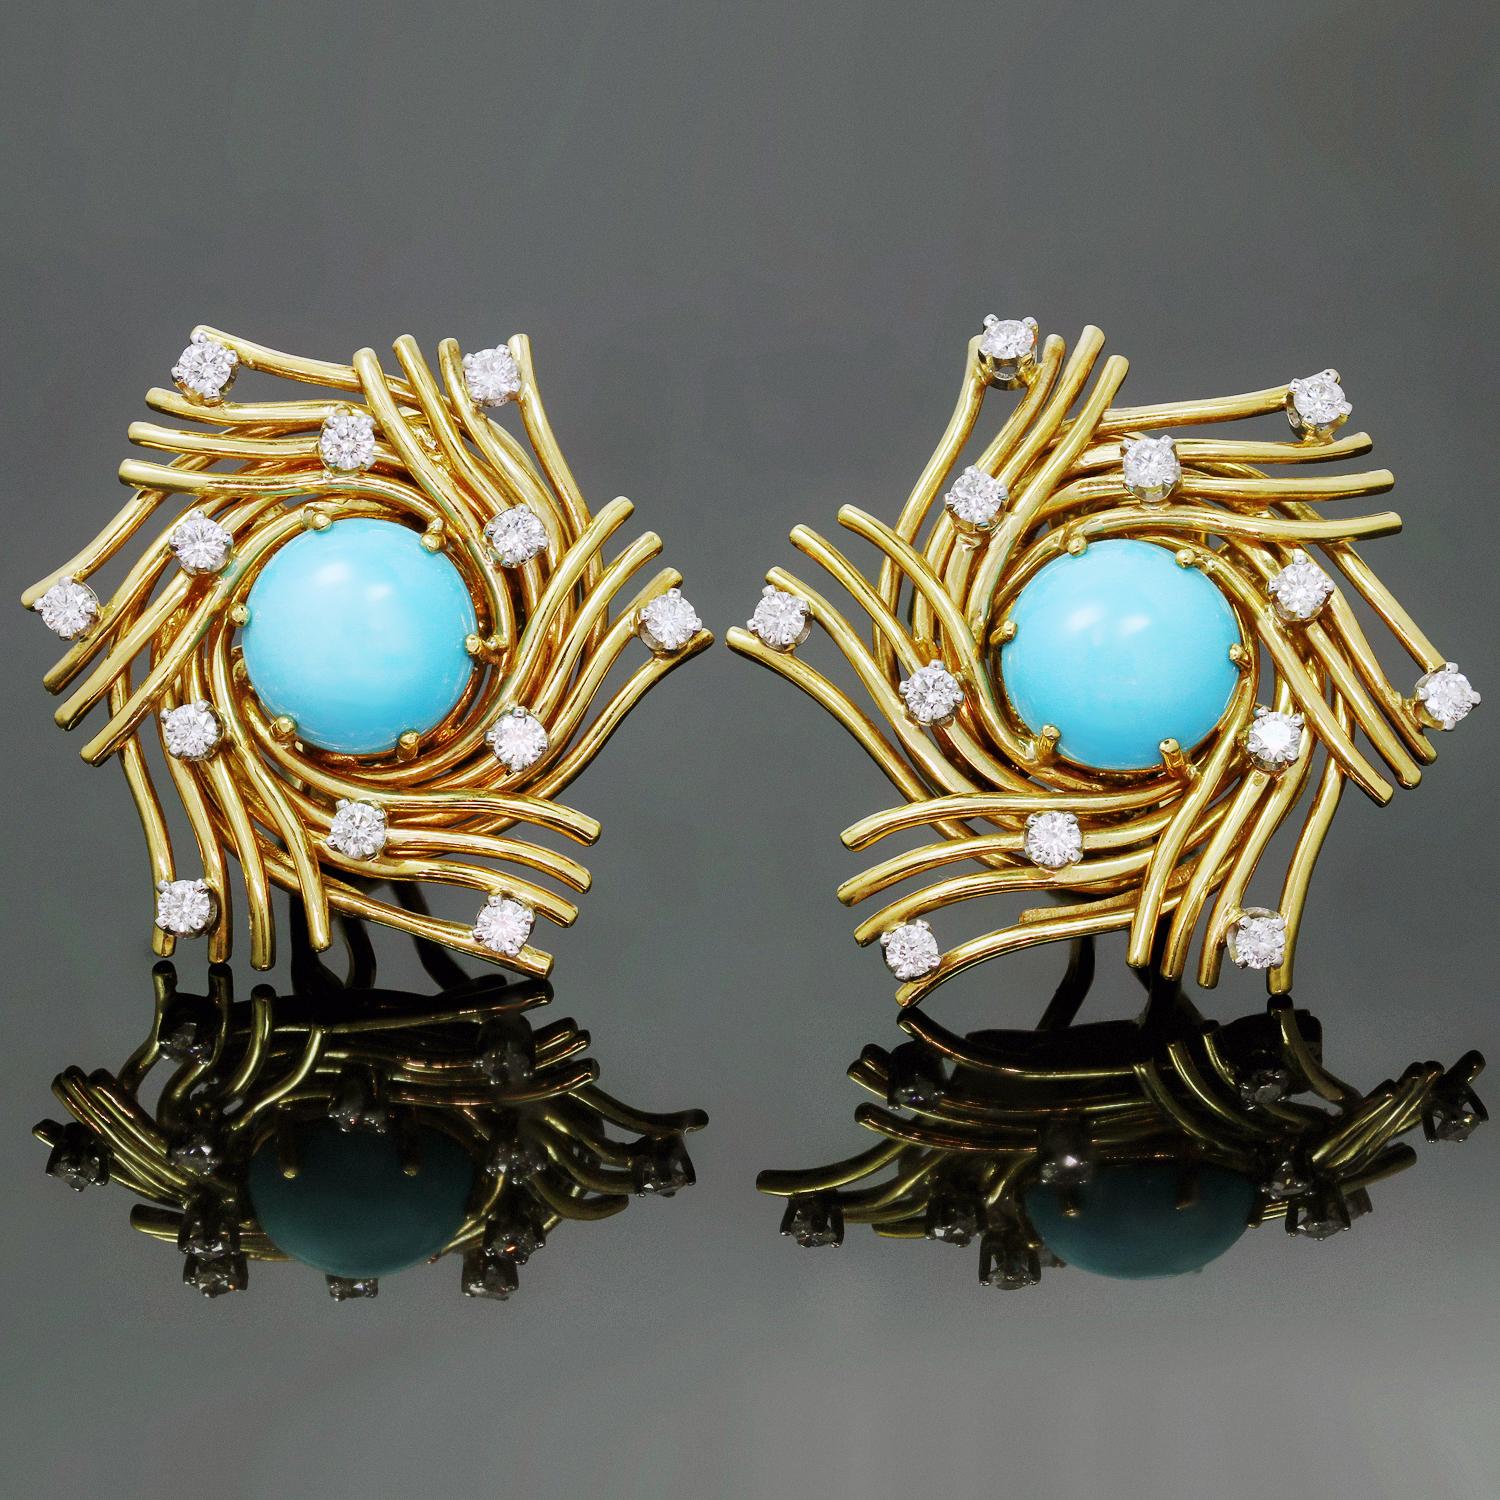 These striking Tiffany & Co. earrings are crafted in 18k yellow gold and feature round cabochon turquoise stones set in a swirl of gold wire and accented with platinum prong-set brilliant-cut round diamonds of an estimated 1.20 carats. The hinged